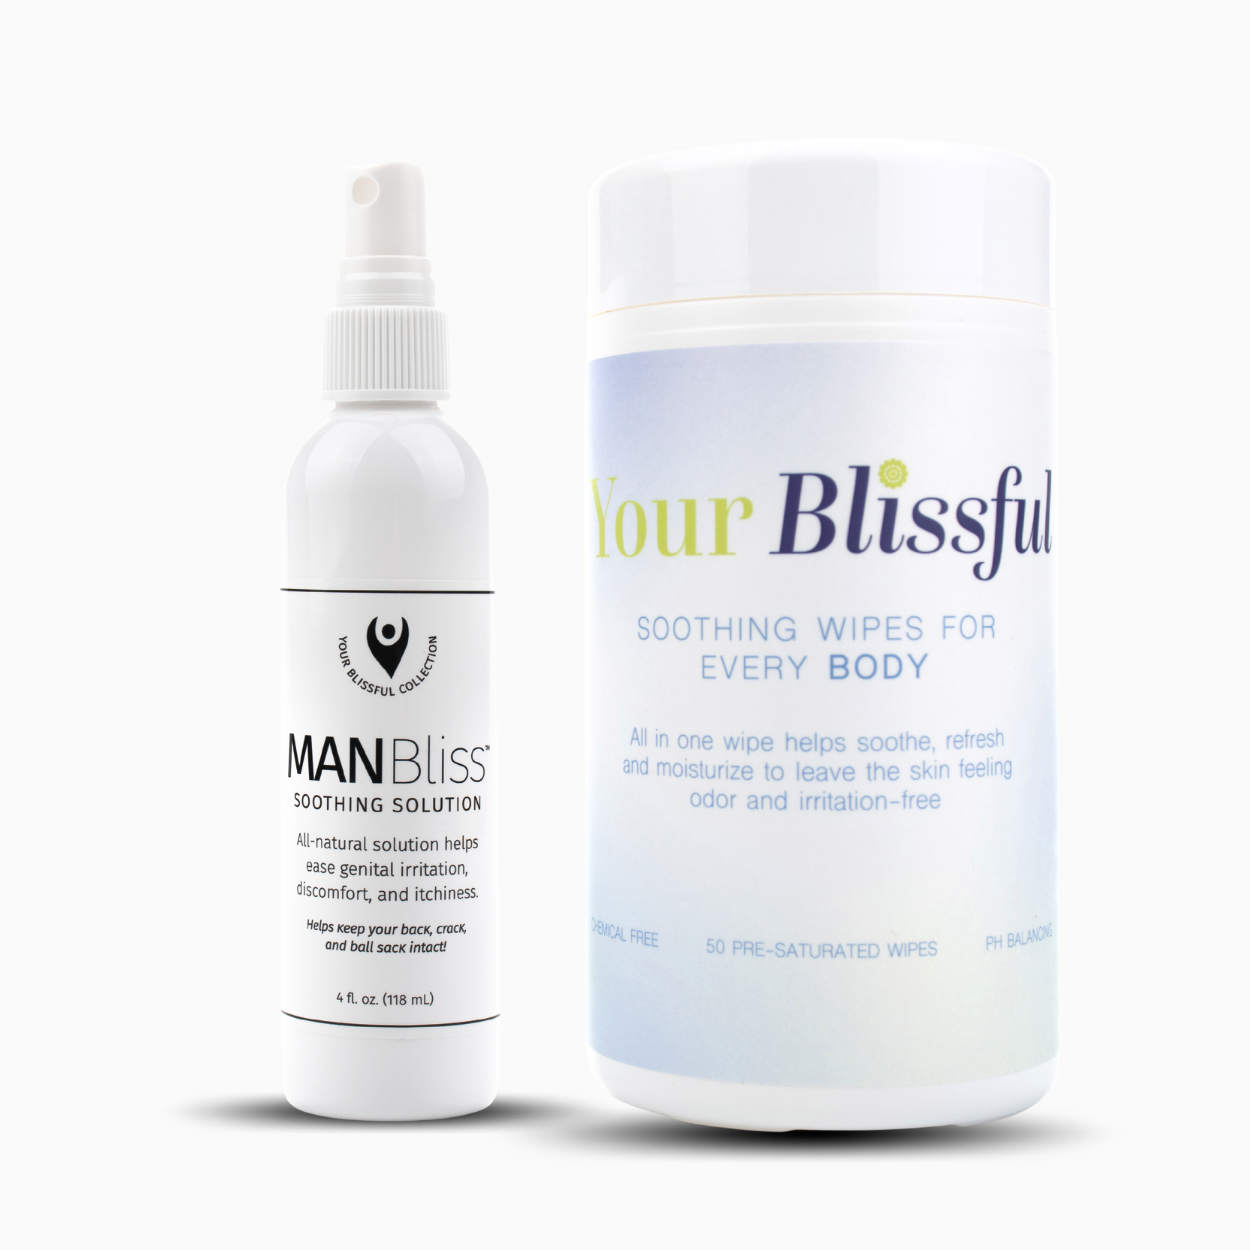 Man Bliss Soothing Spray + Soothing Wipes Duo